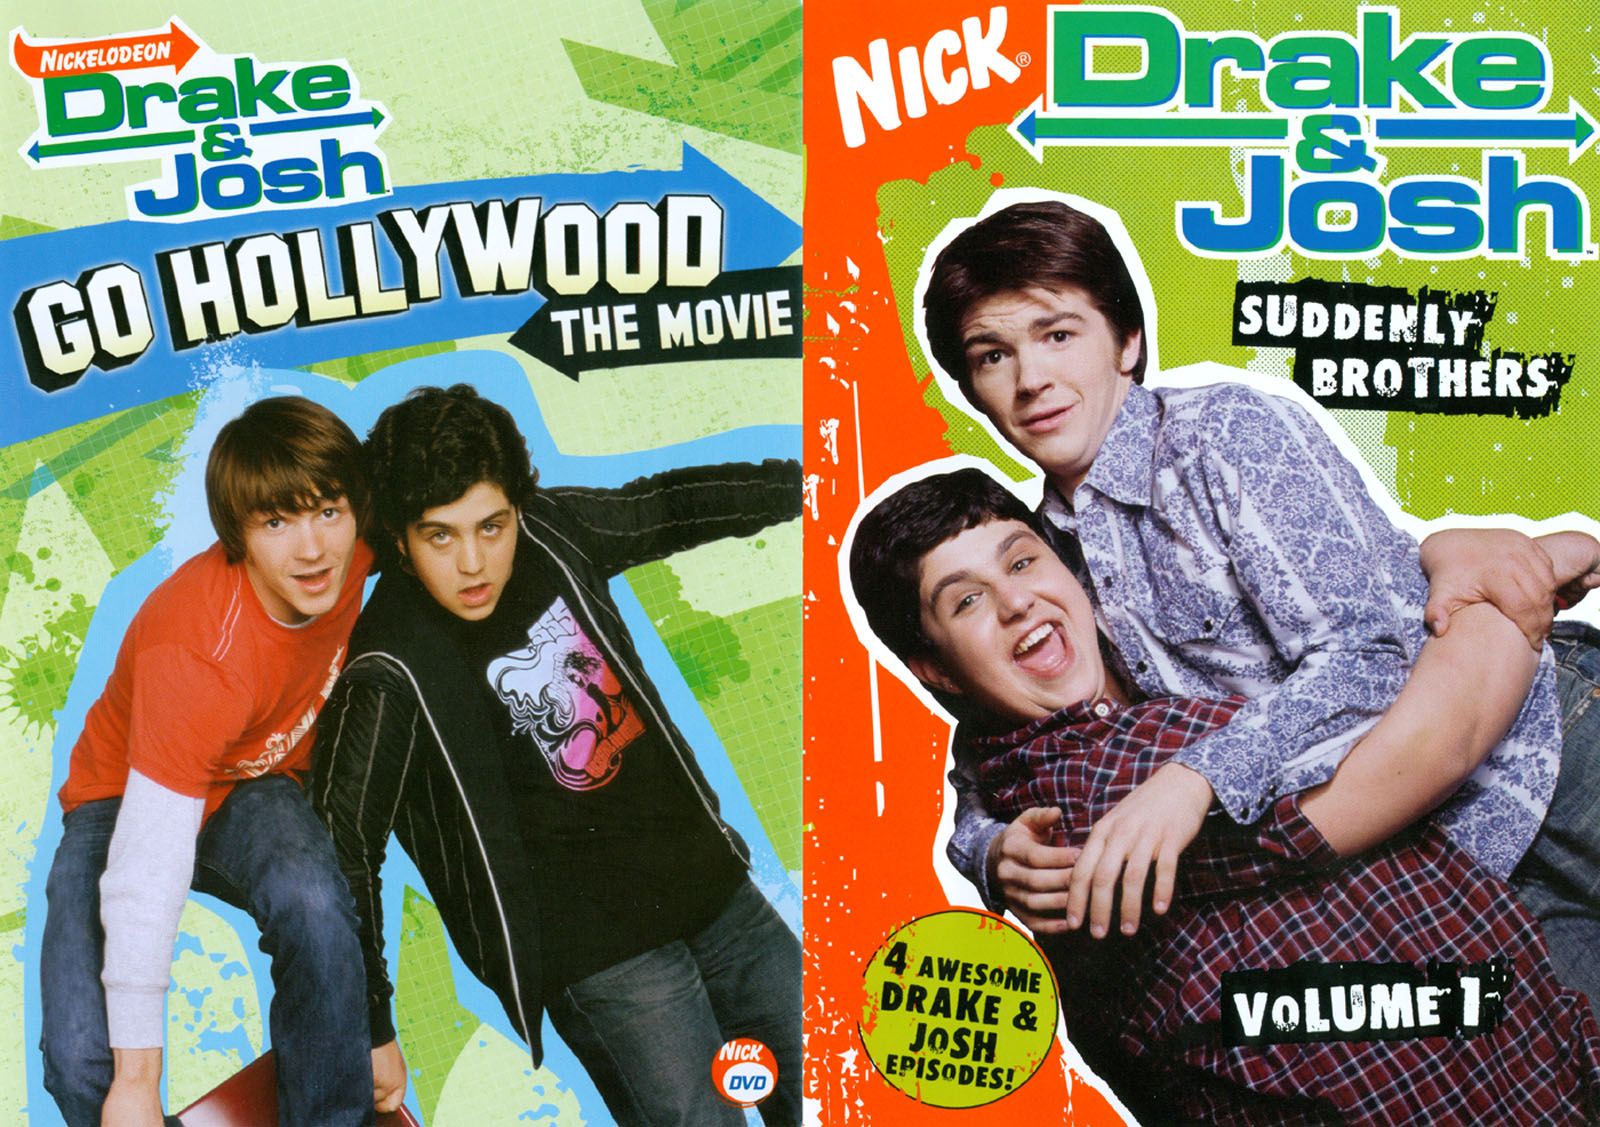 Best Buy: Drake & Josh: Go Hollywood/Suddenly Brothers [With